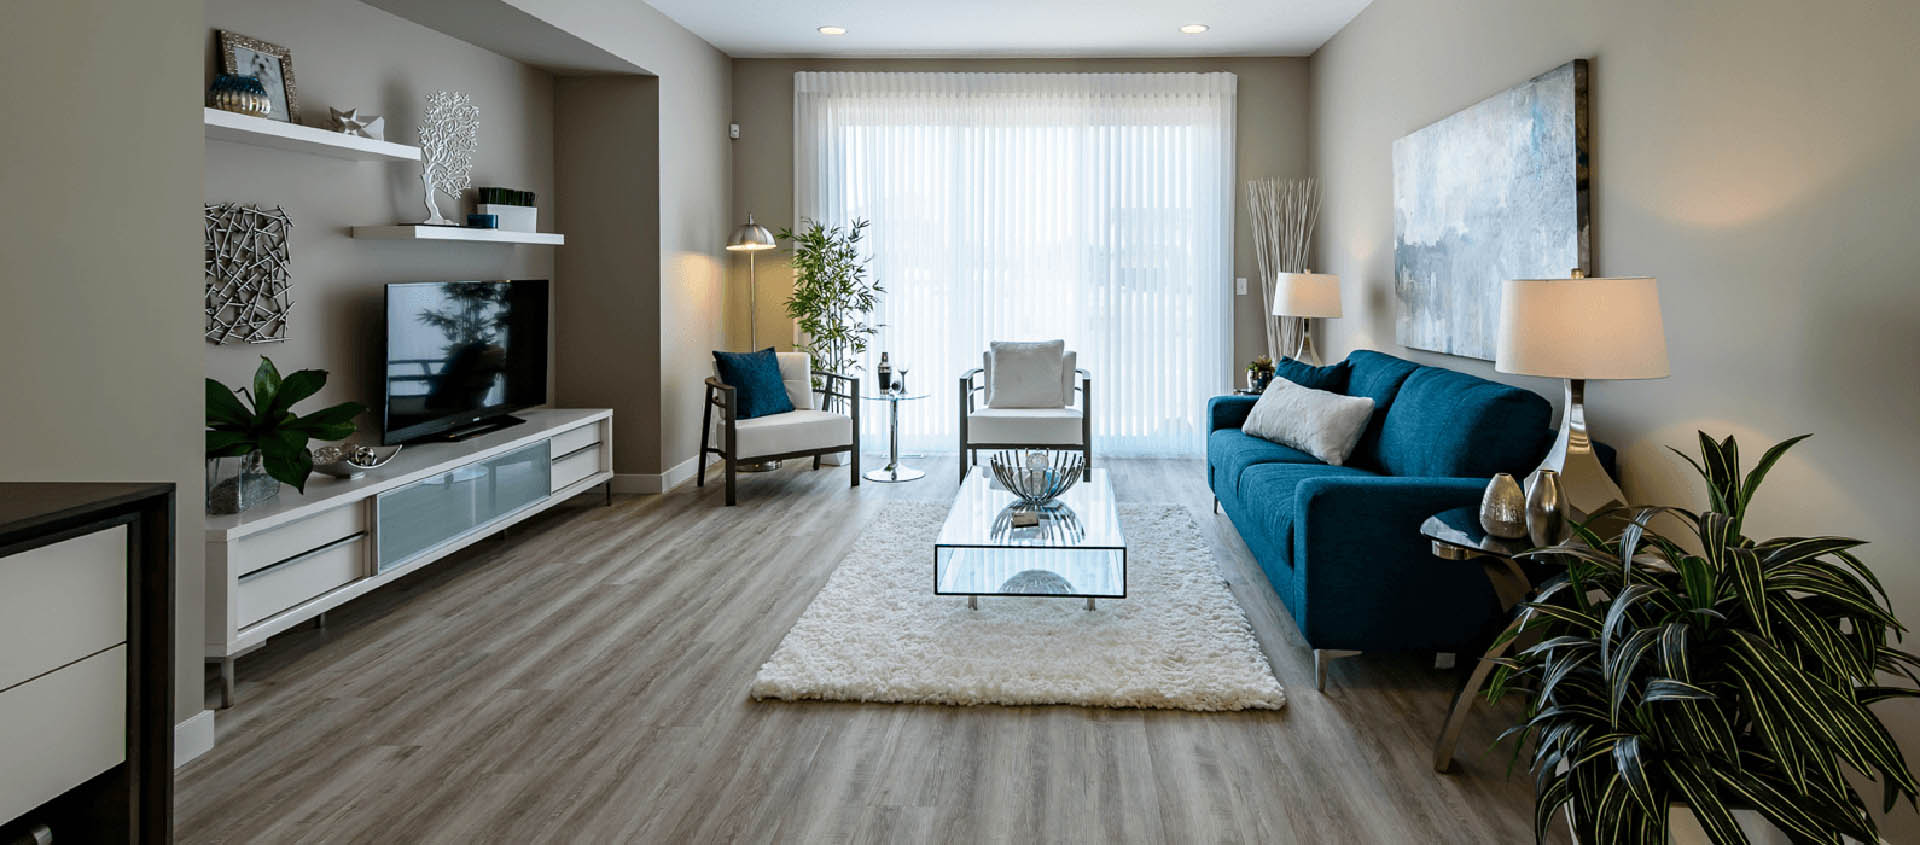 Your Flooring Choices in a New Home Build Featured Image